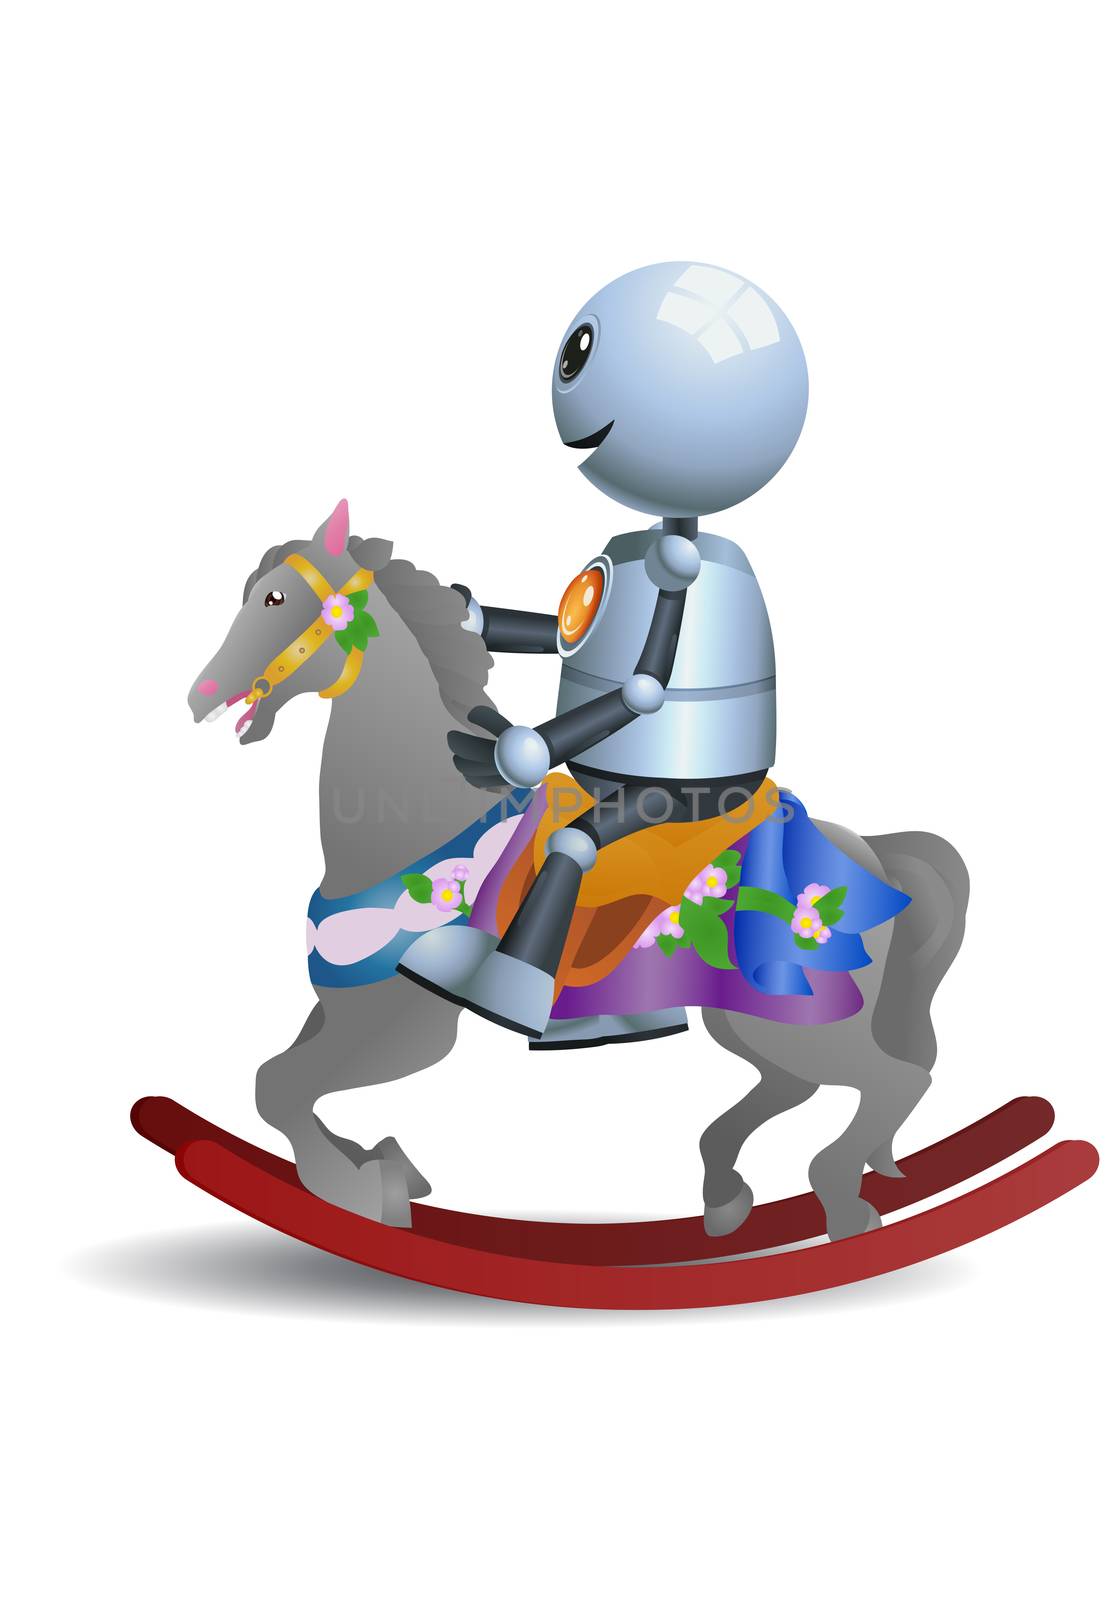 illustration of a happy little robot riding horse toy on isolated white background